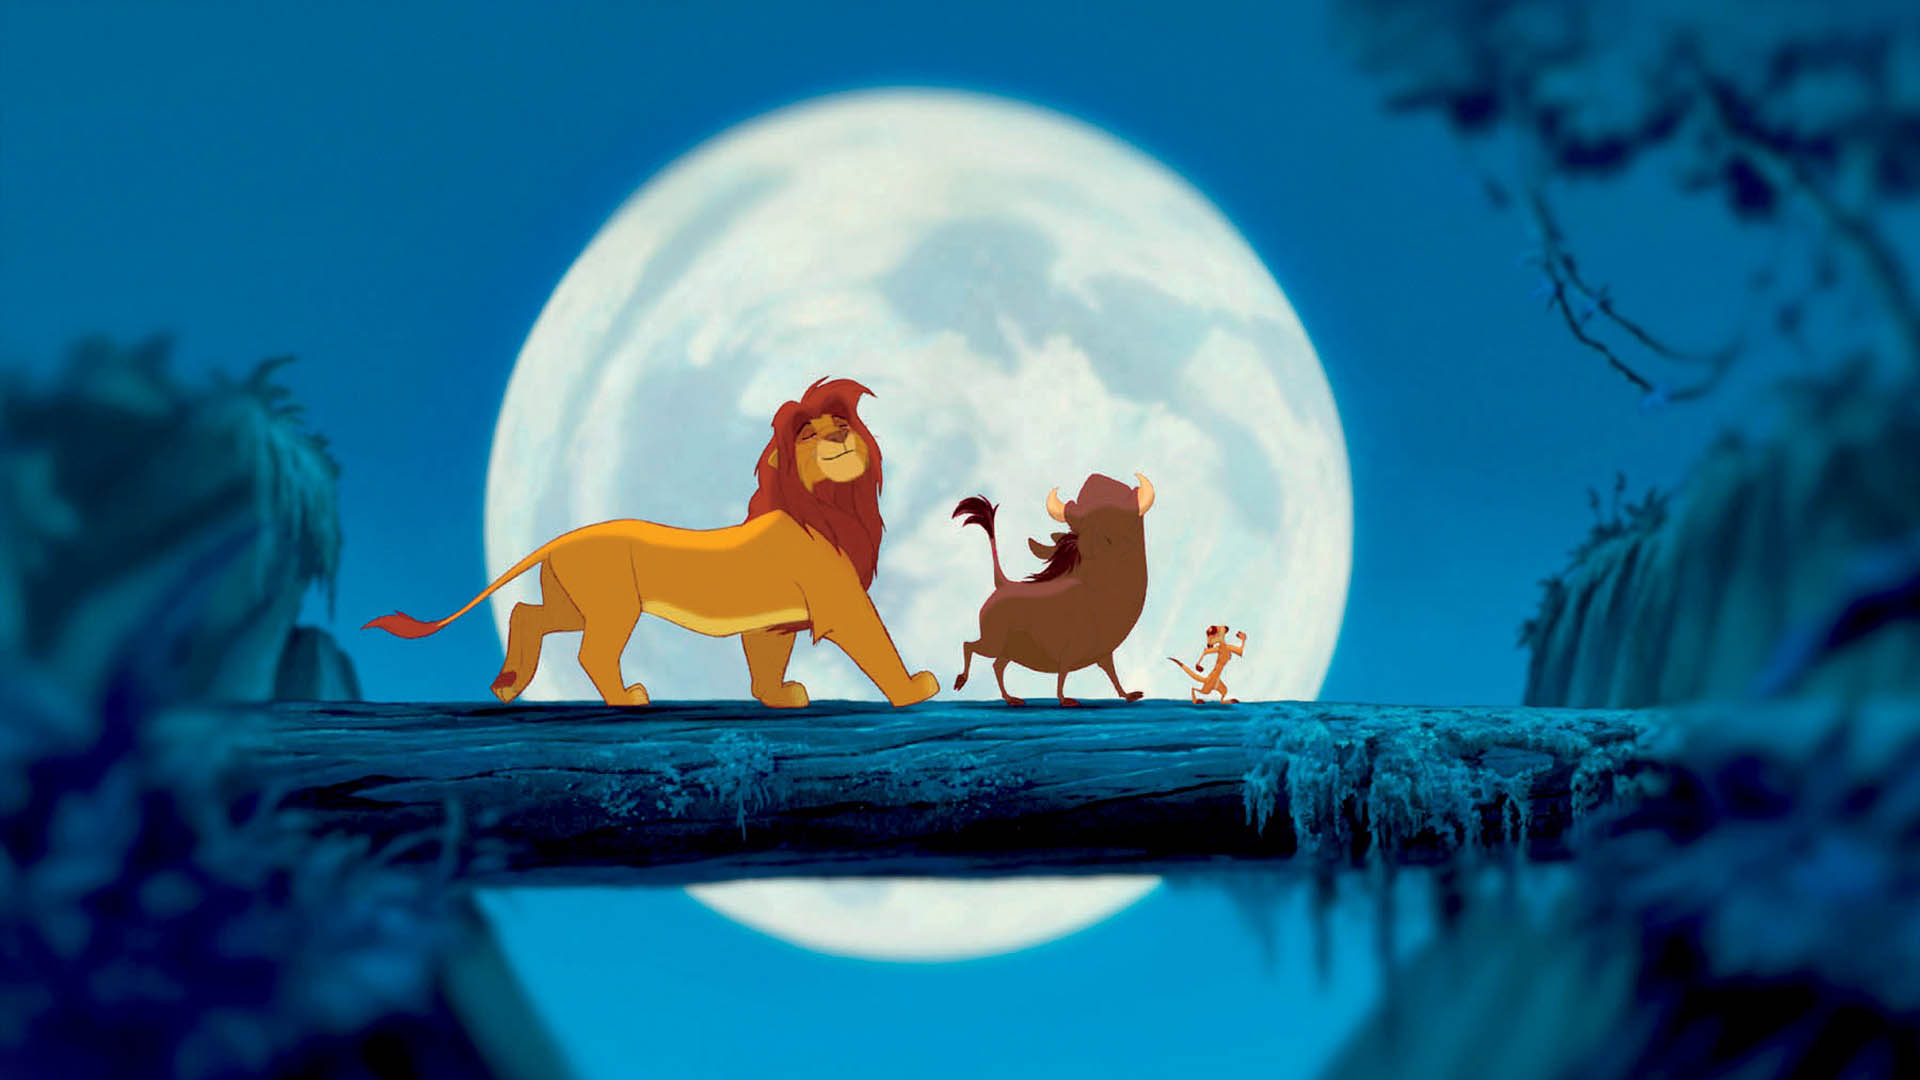 The Lion King 3D Wallpaper 1920x1080 Wallpapers 1920x1080 Wallpapers 1920x1080